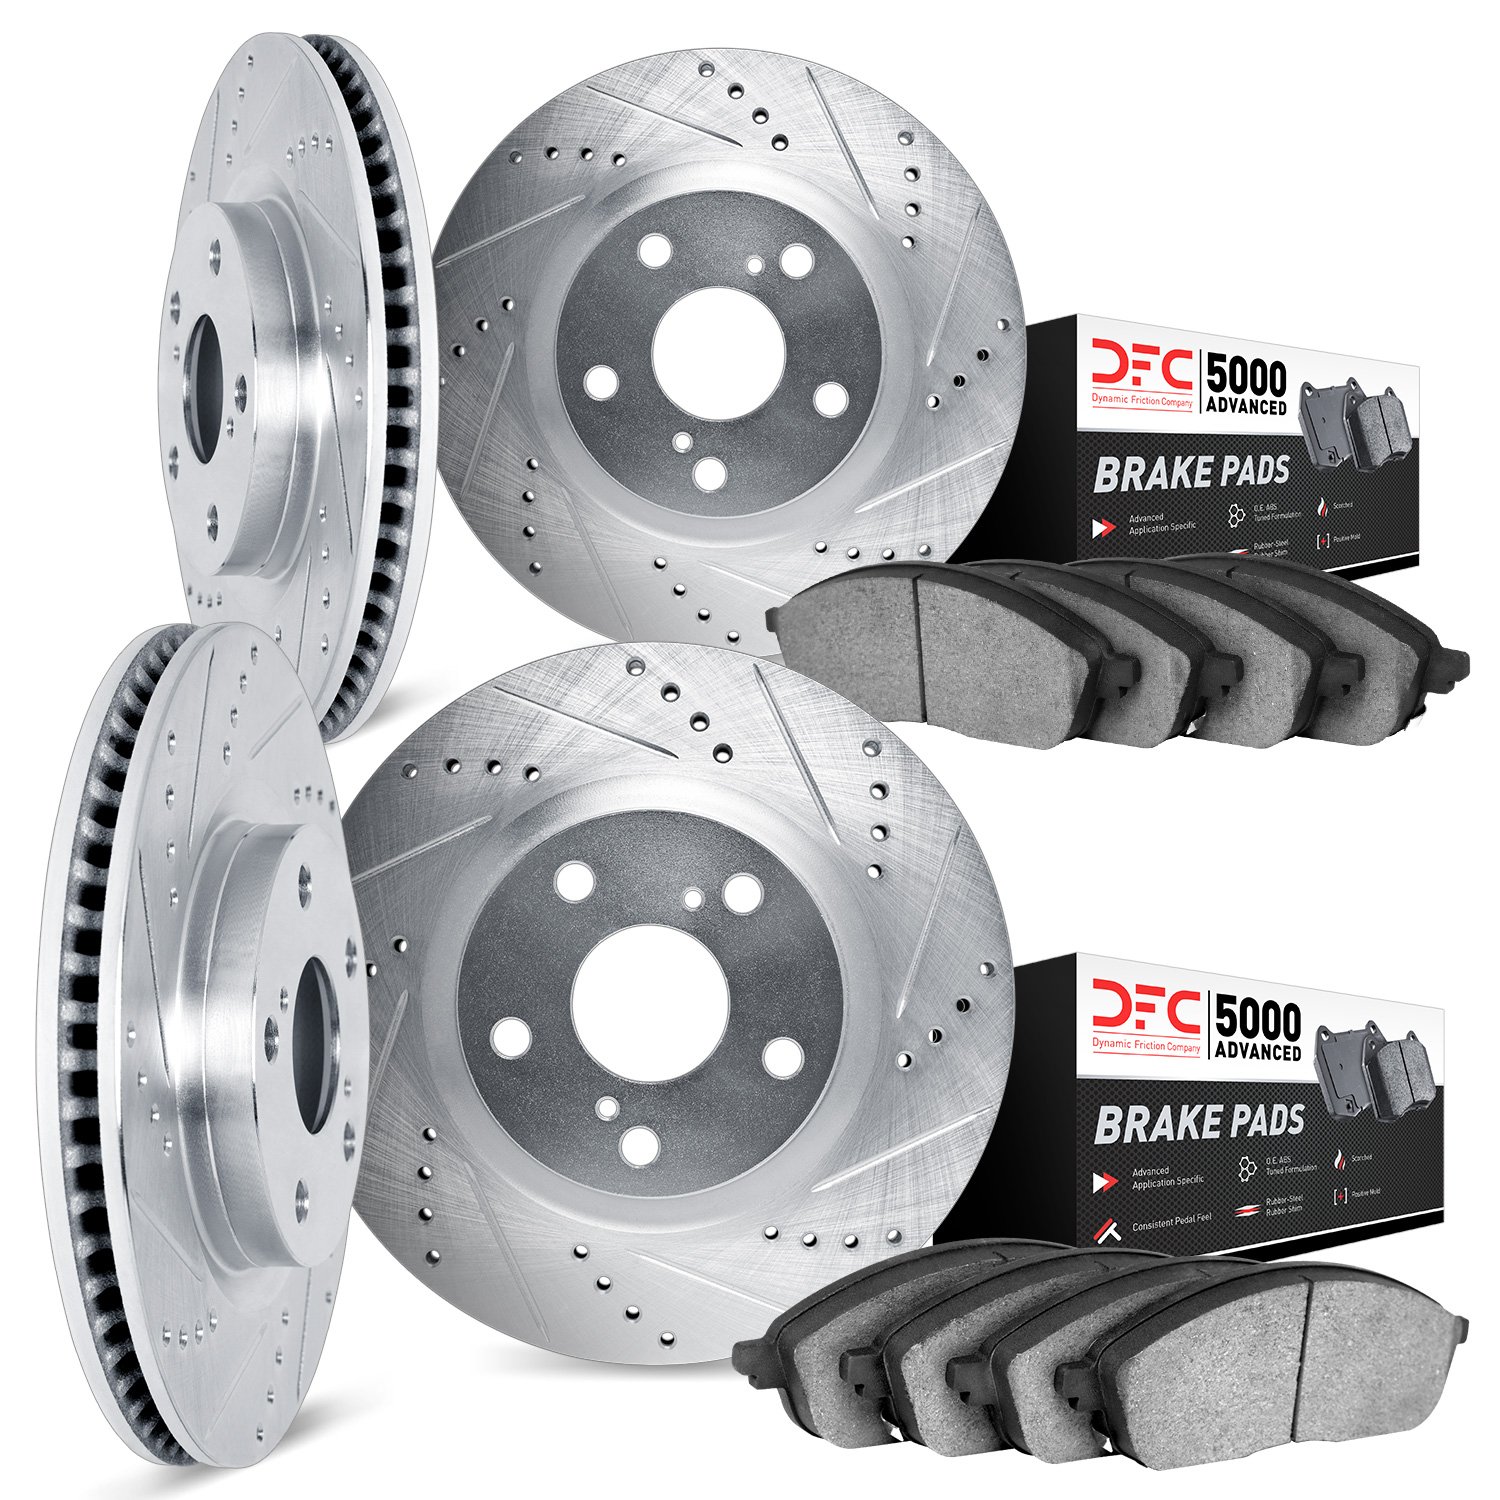 7504-31040 Drilled/Slotted Brake Rotors w/5000 Advanced Brake Pads Kit [Silver], 2010-2017 BMW, Position: Front and Rear